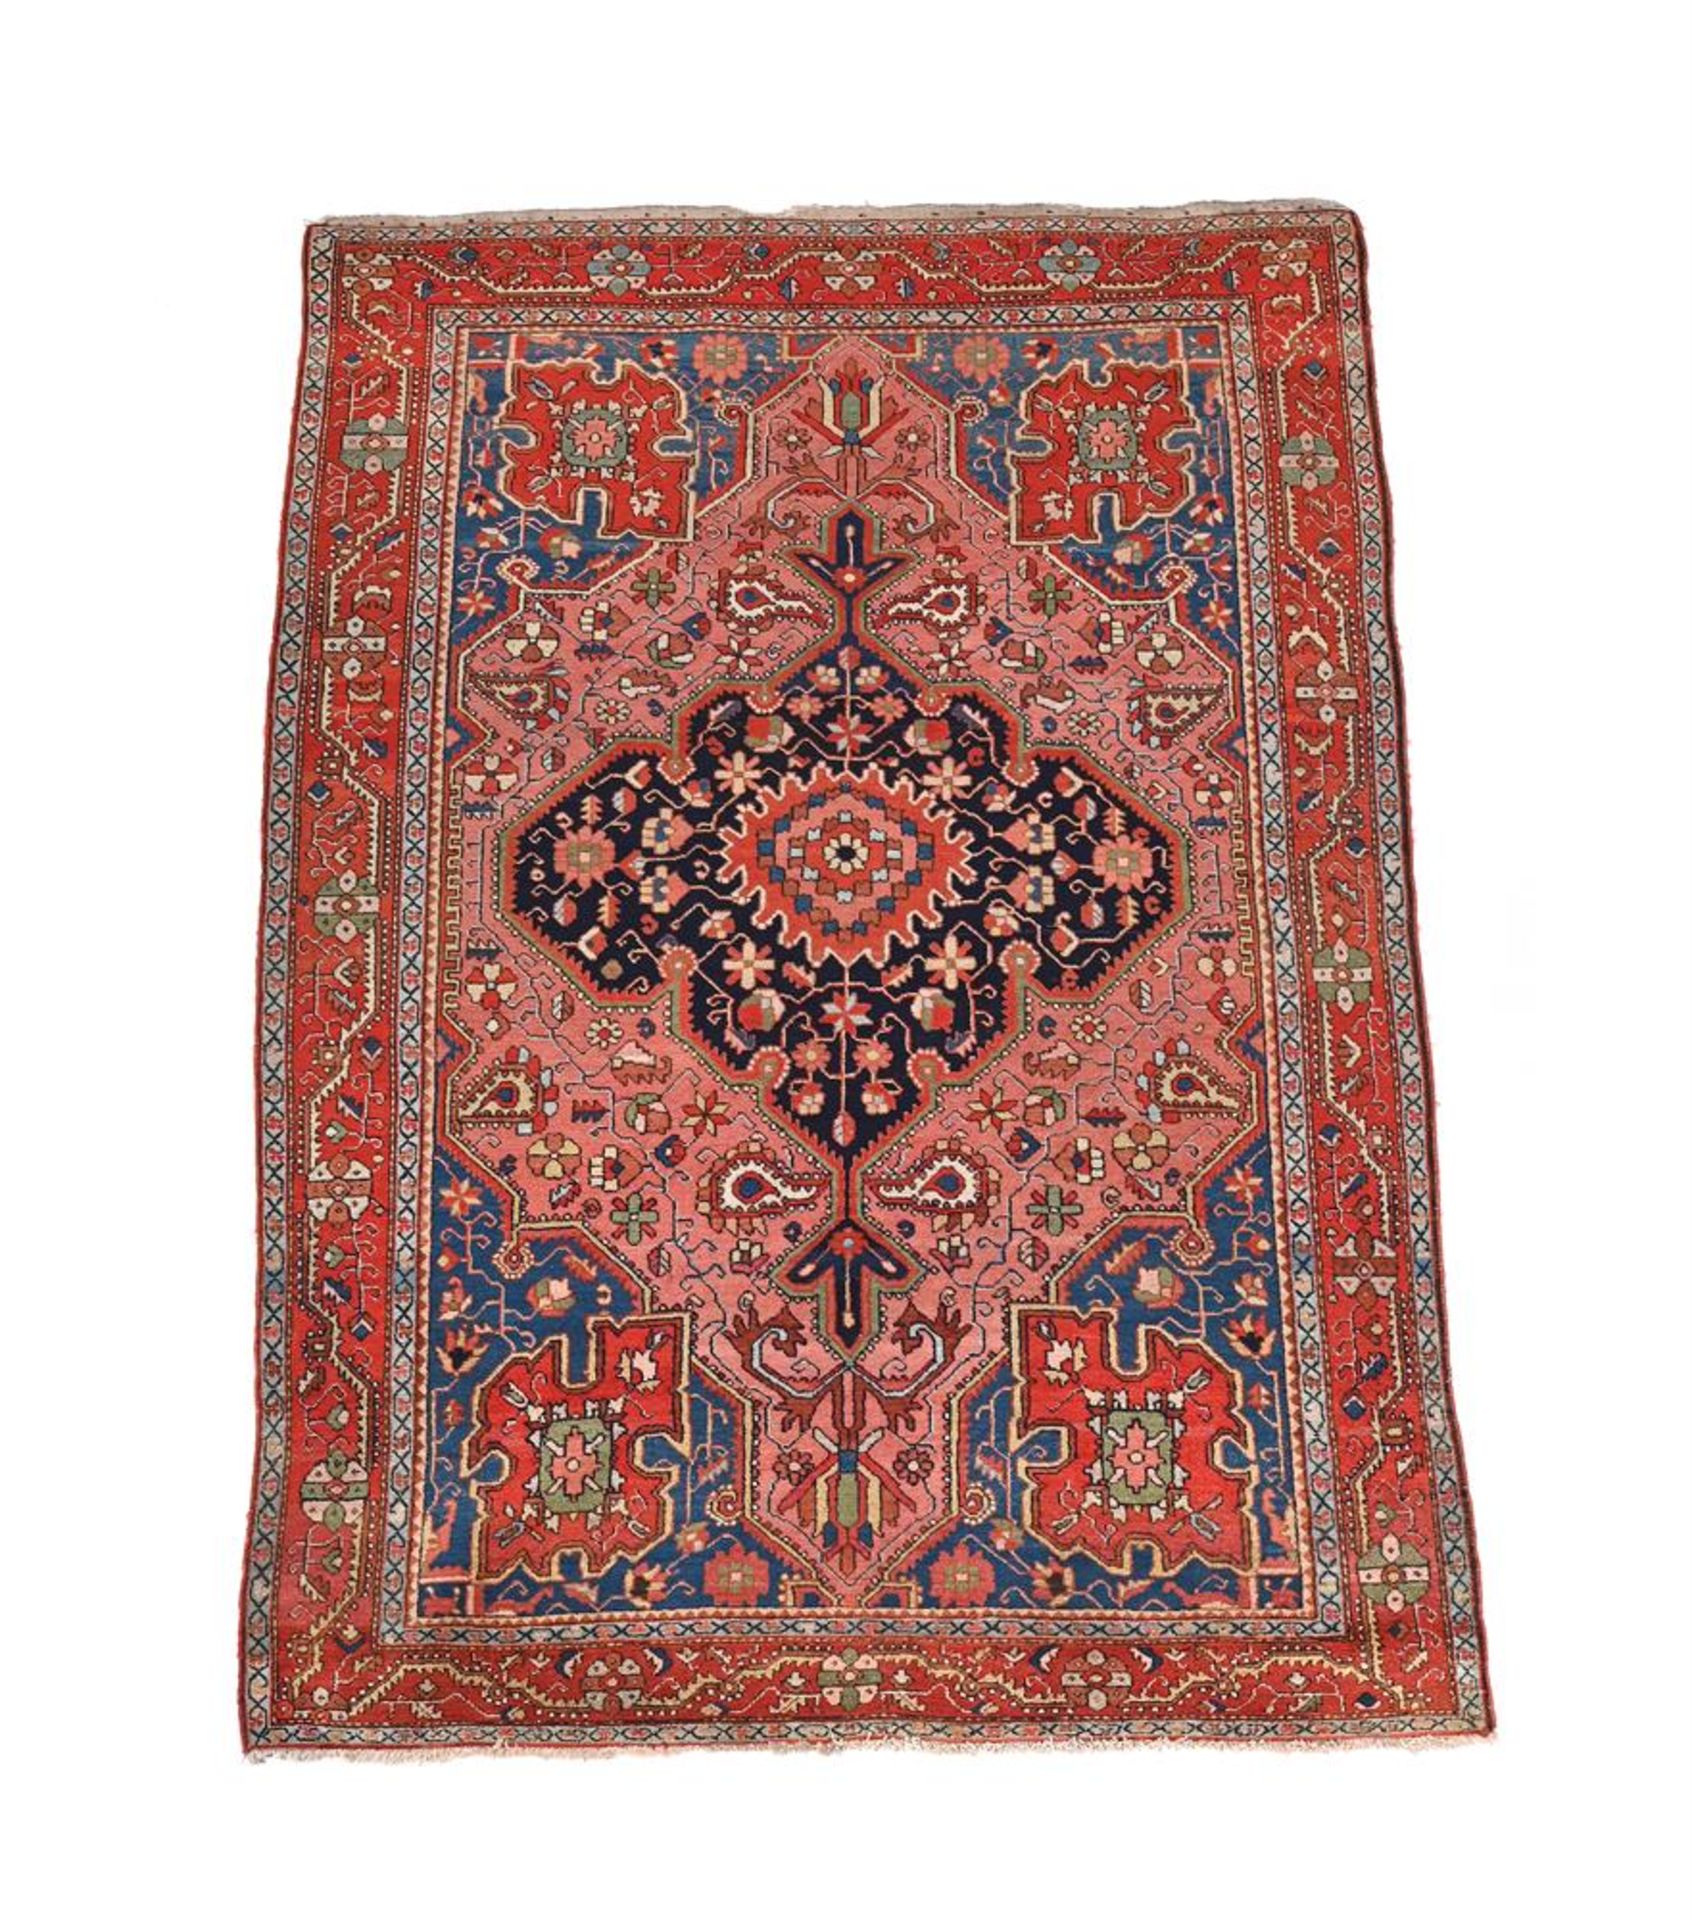 A MALAYER RUG, approximately 211 x 138cm